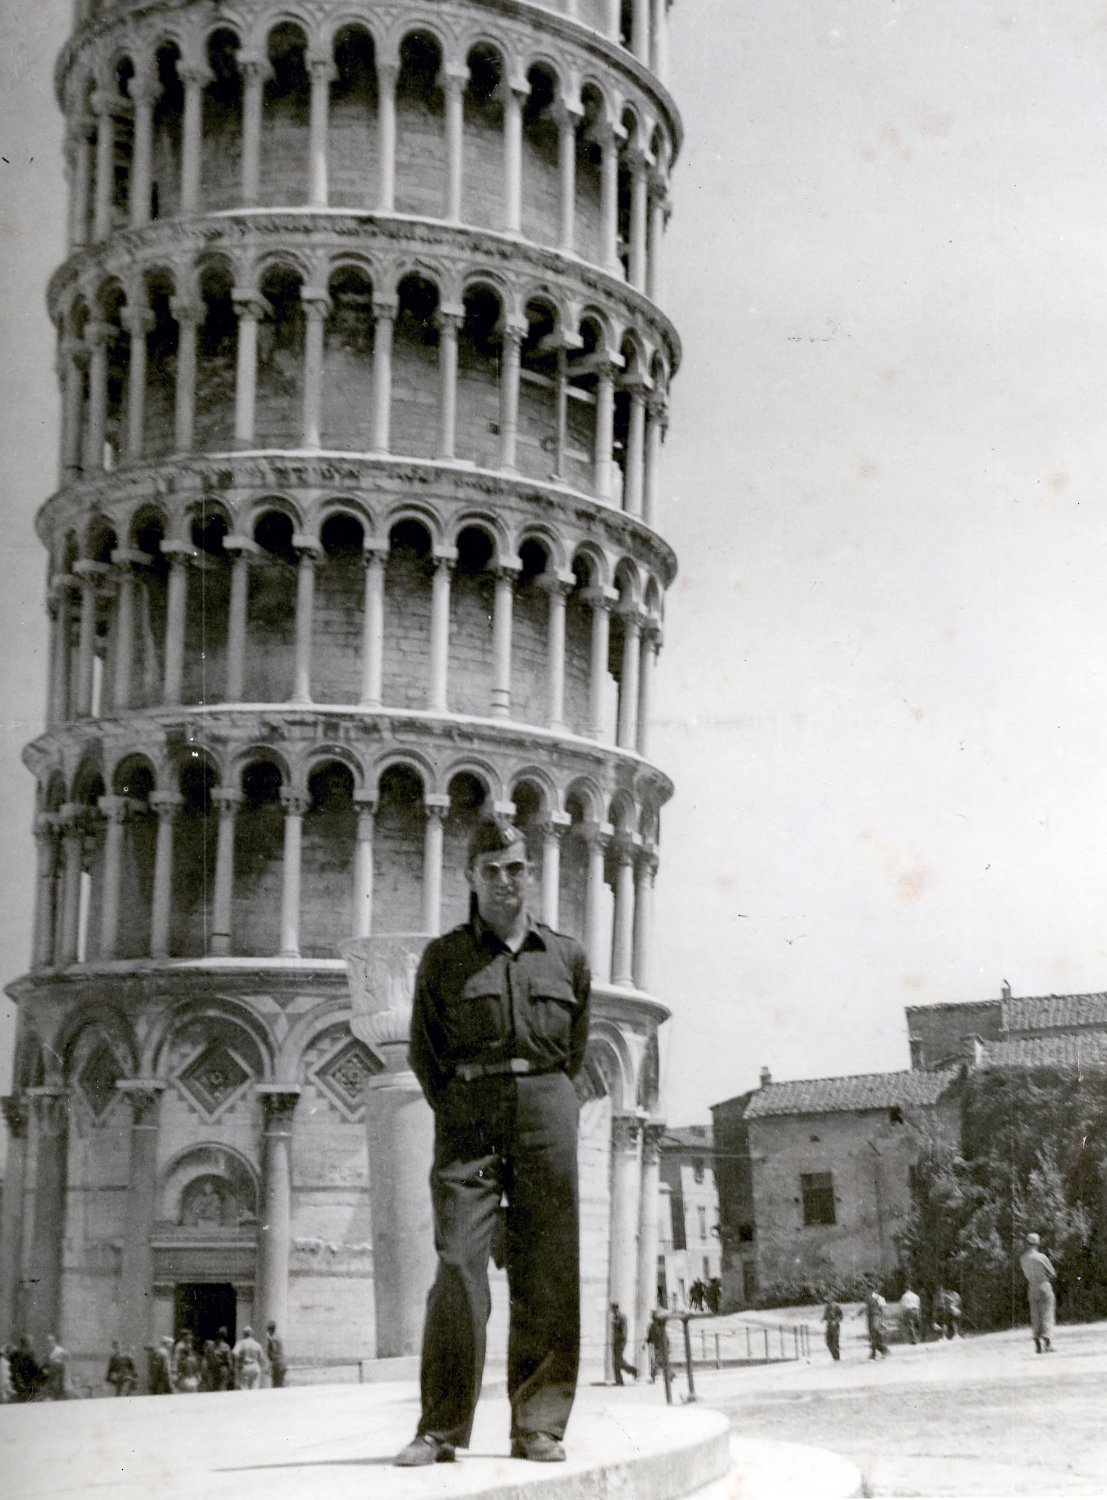 Hector P. Garcia in military uniform is standing in front of the Leaning Tower of Pisa, Italy